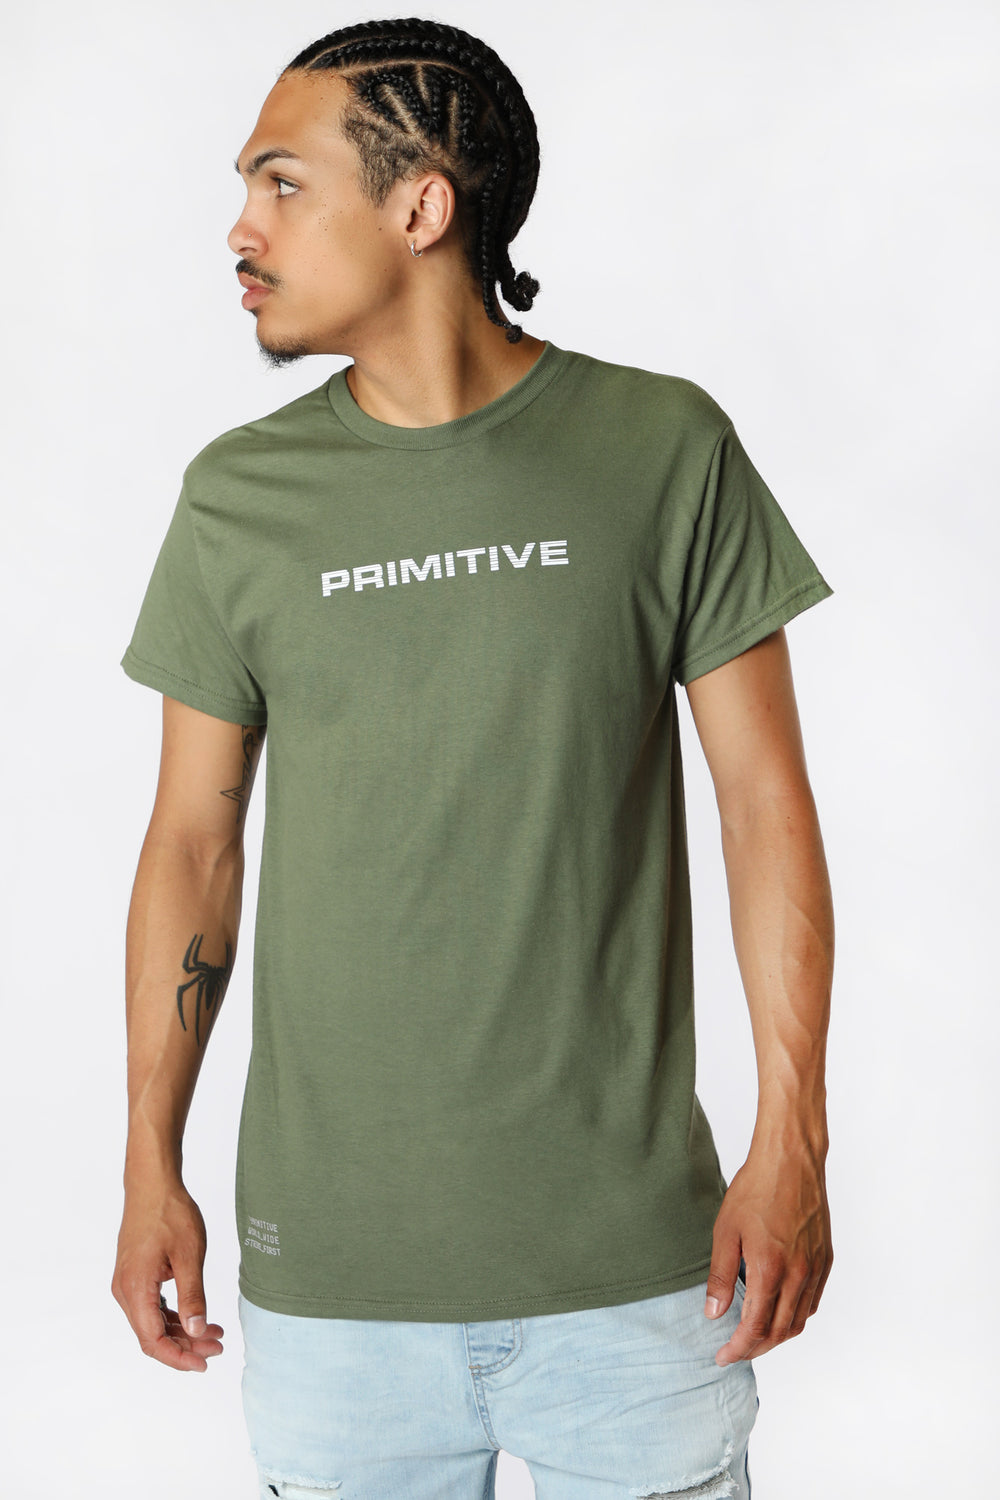 Primitive x Call Of Duty Ghost T-Shirt Primitive x Call Of Duty Ghost T-Shirt